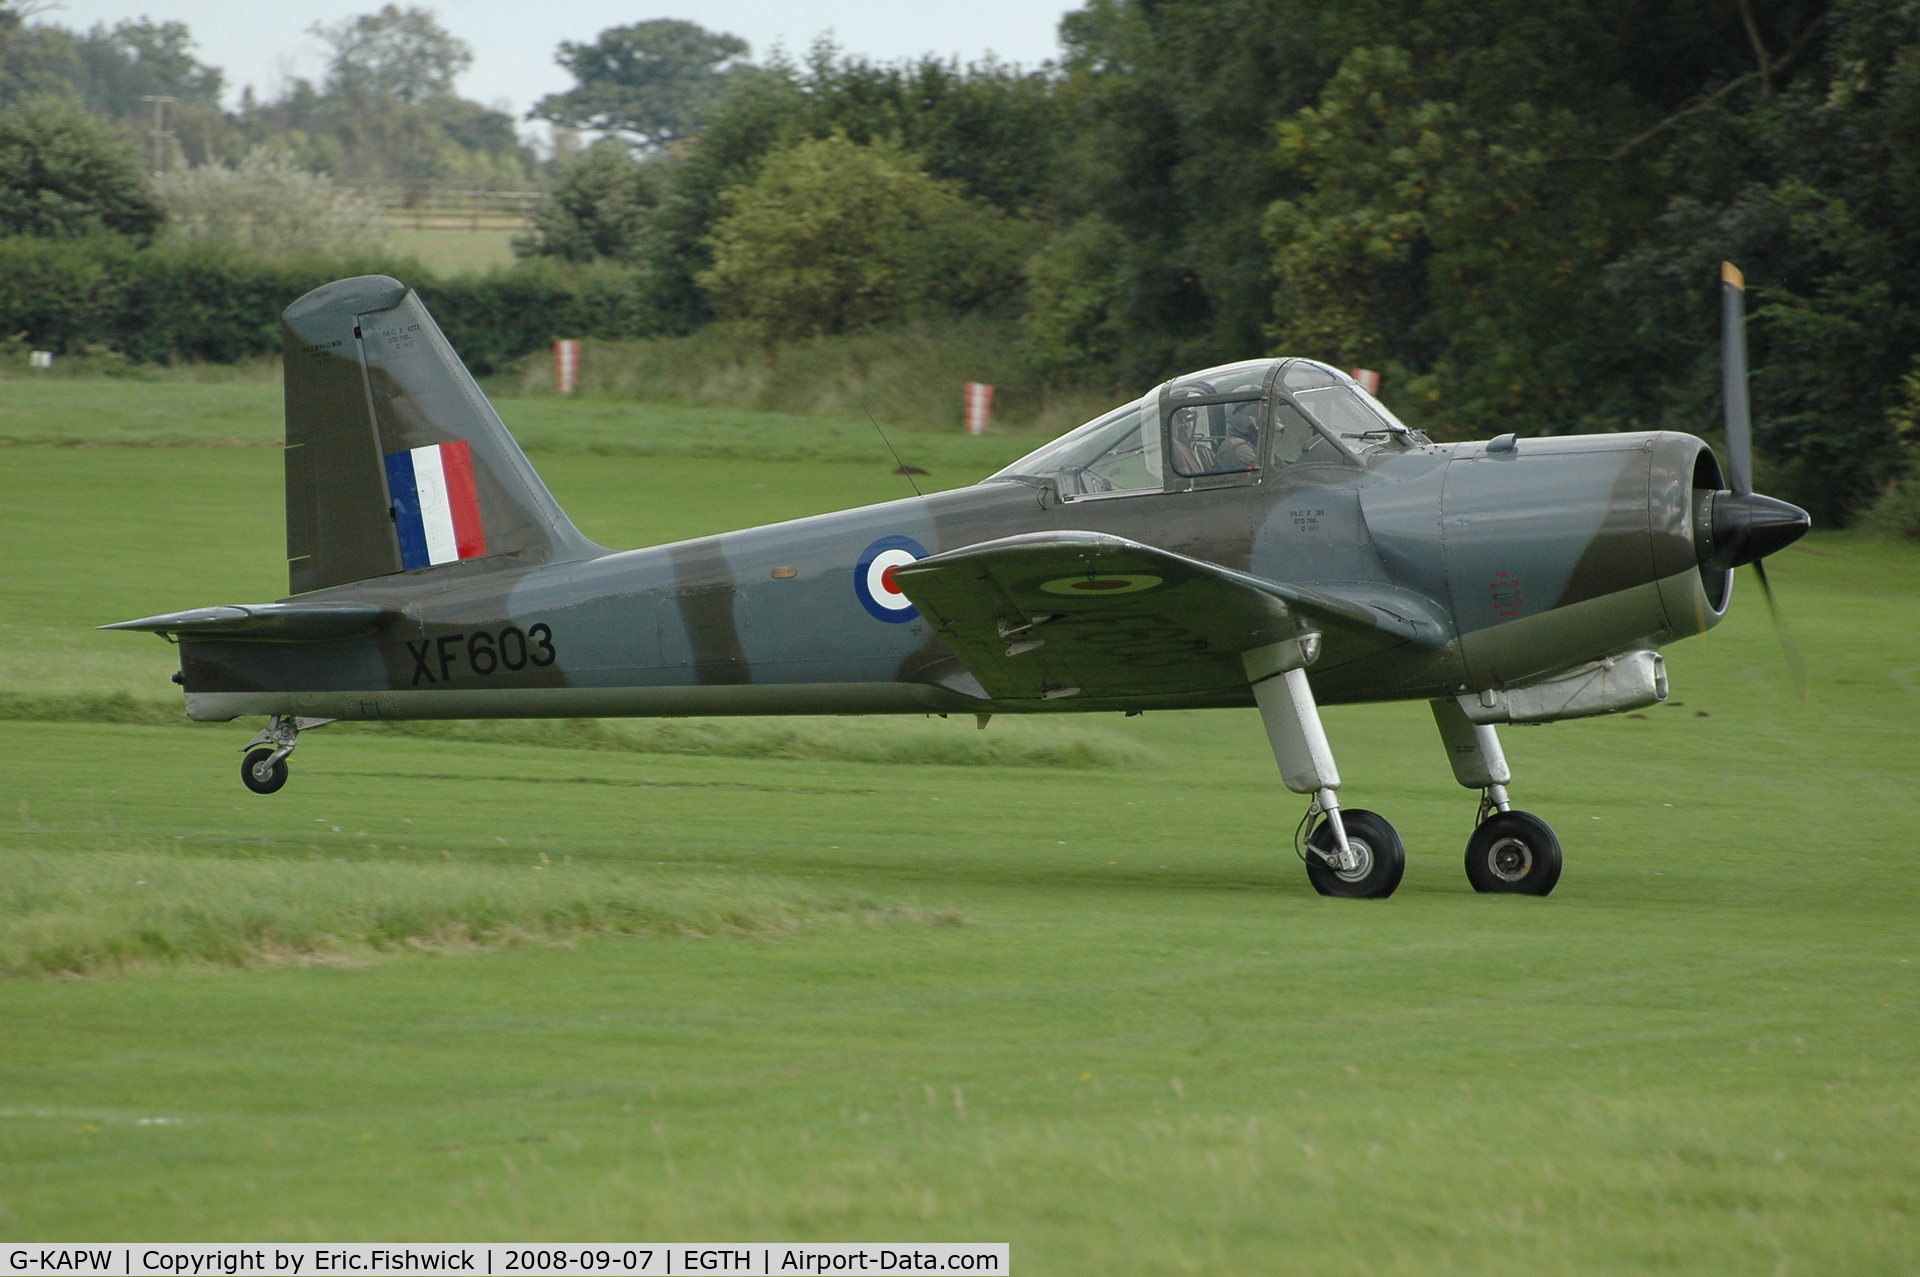 G-KAPW, 1955 Percival P-56 Provost T.1 C/N PAC/56/311, 2. XF603 at Shuttleworth Pagent Air Display 07 Sep 08